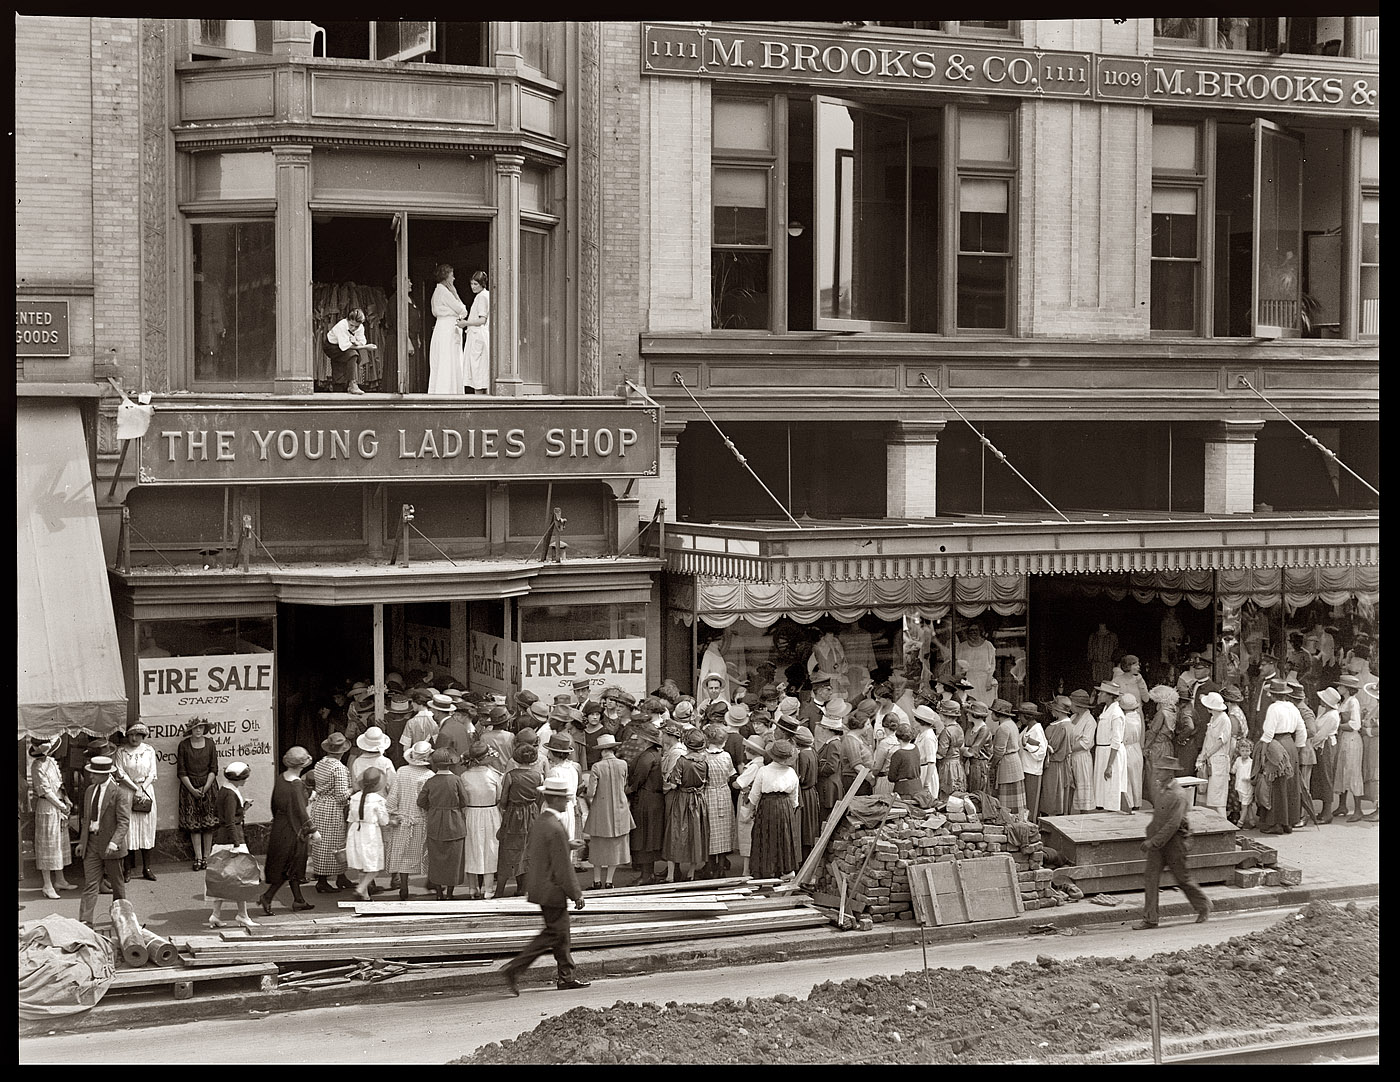 Fire sale at the Young Ladies Shop in 1922, probably in Washington, D.C. 4x5 inch glass negative, National Photo Company Collection. View full size.